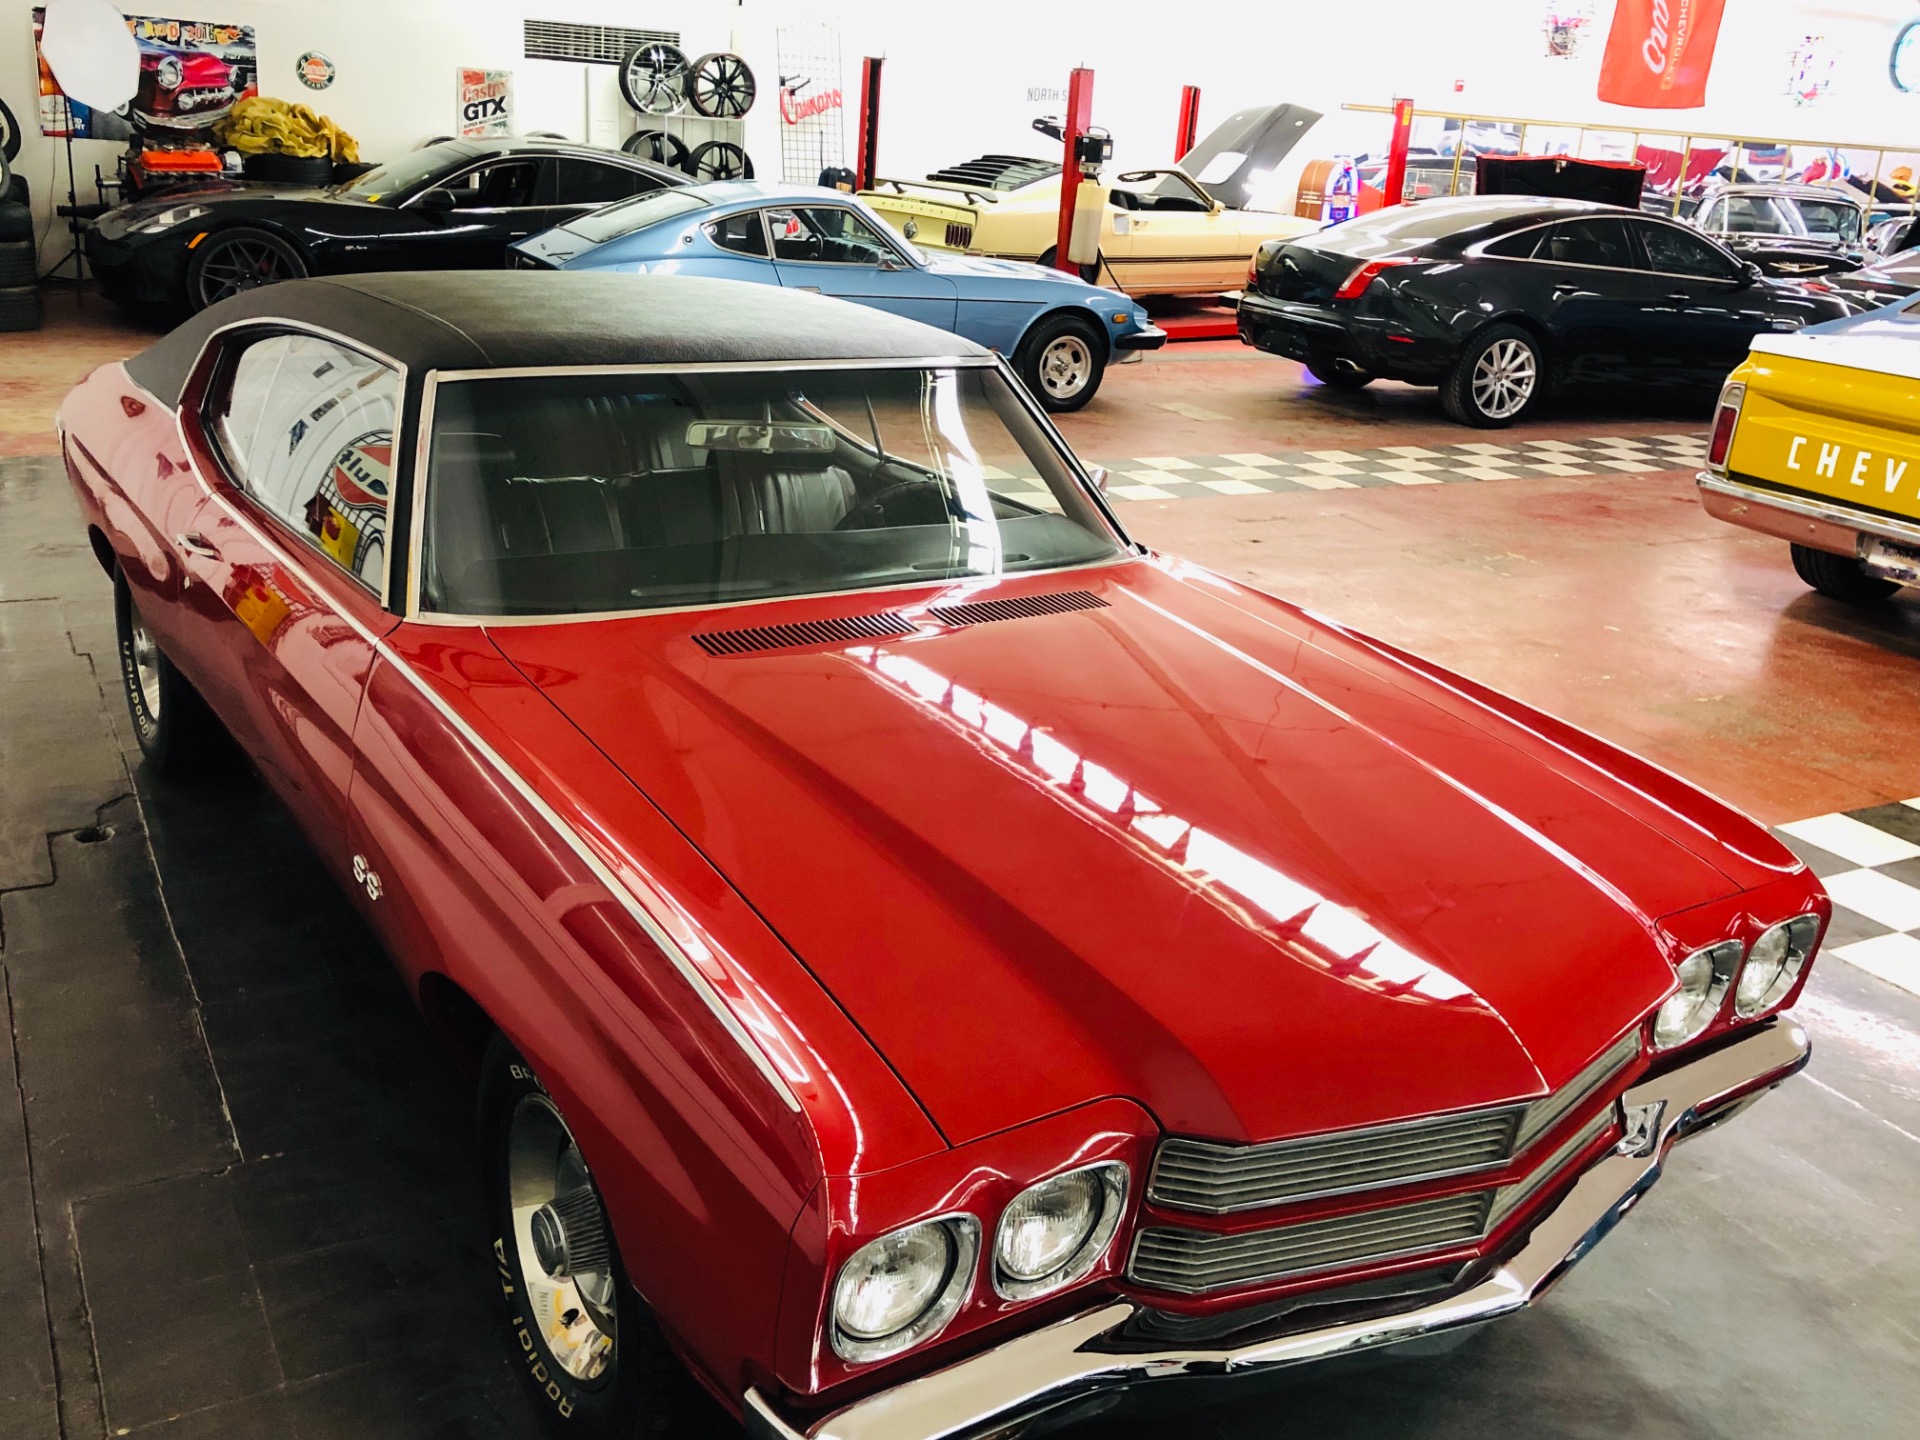 Used 1970 Chevrolet Chevelle -NUMBERS MATCHING-AUTOMATIC-RELIABLE-FINANCING AVAILABLE-LOW PMTS- | Mundelein, IL